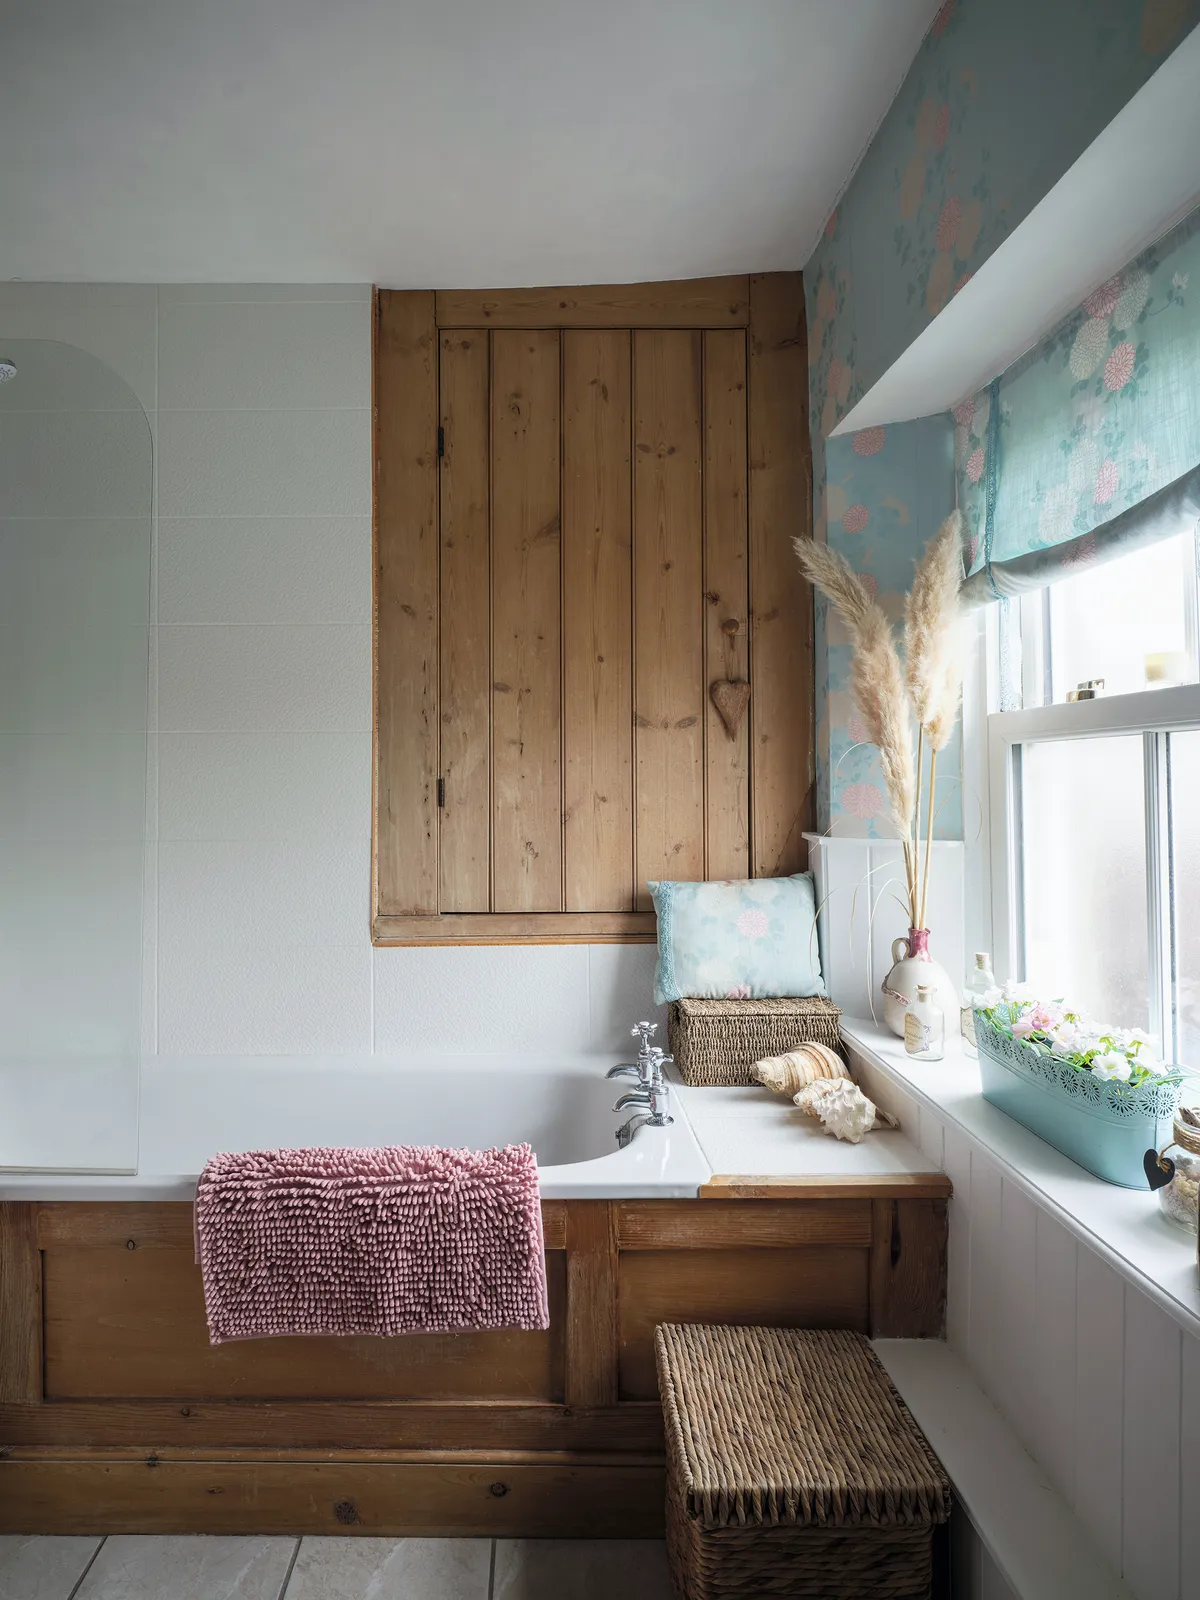 Ali and Gary loved the warm wood tones throughout the house, so they kept a lot of the existing woodwork. In the family bathroom, Ali has lifted it with pastels so it feels light and bright